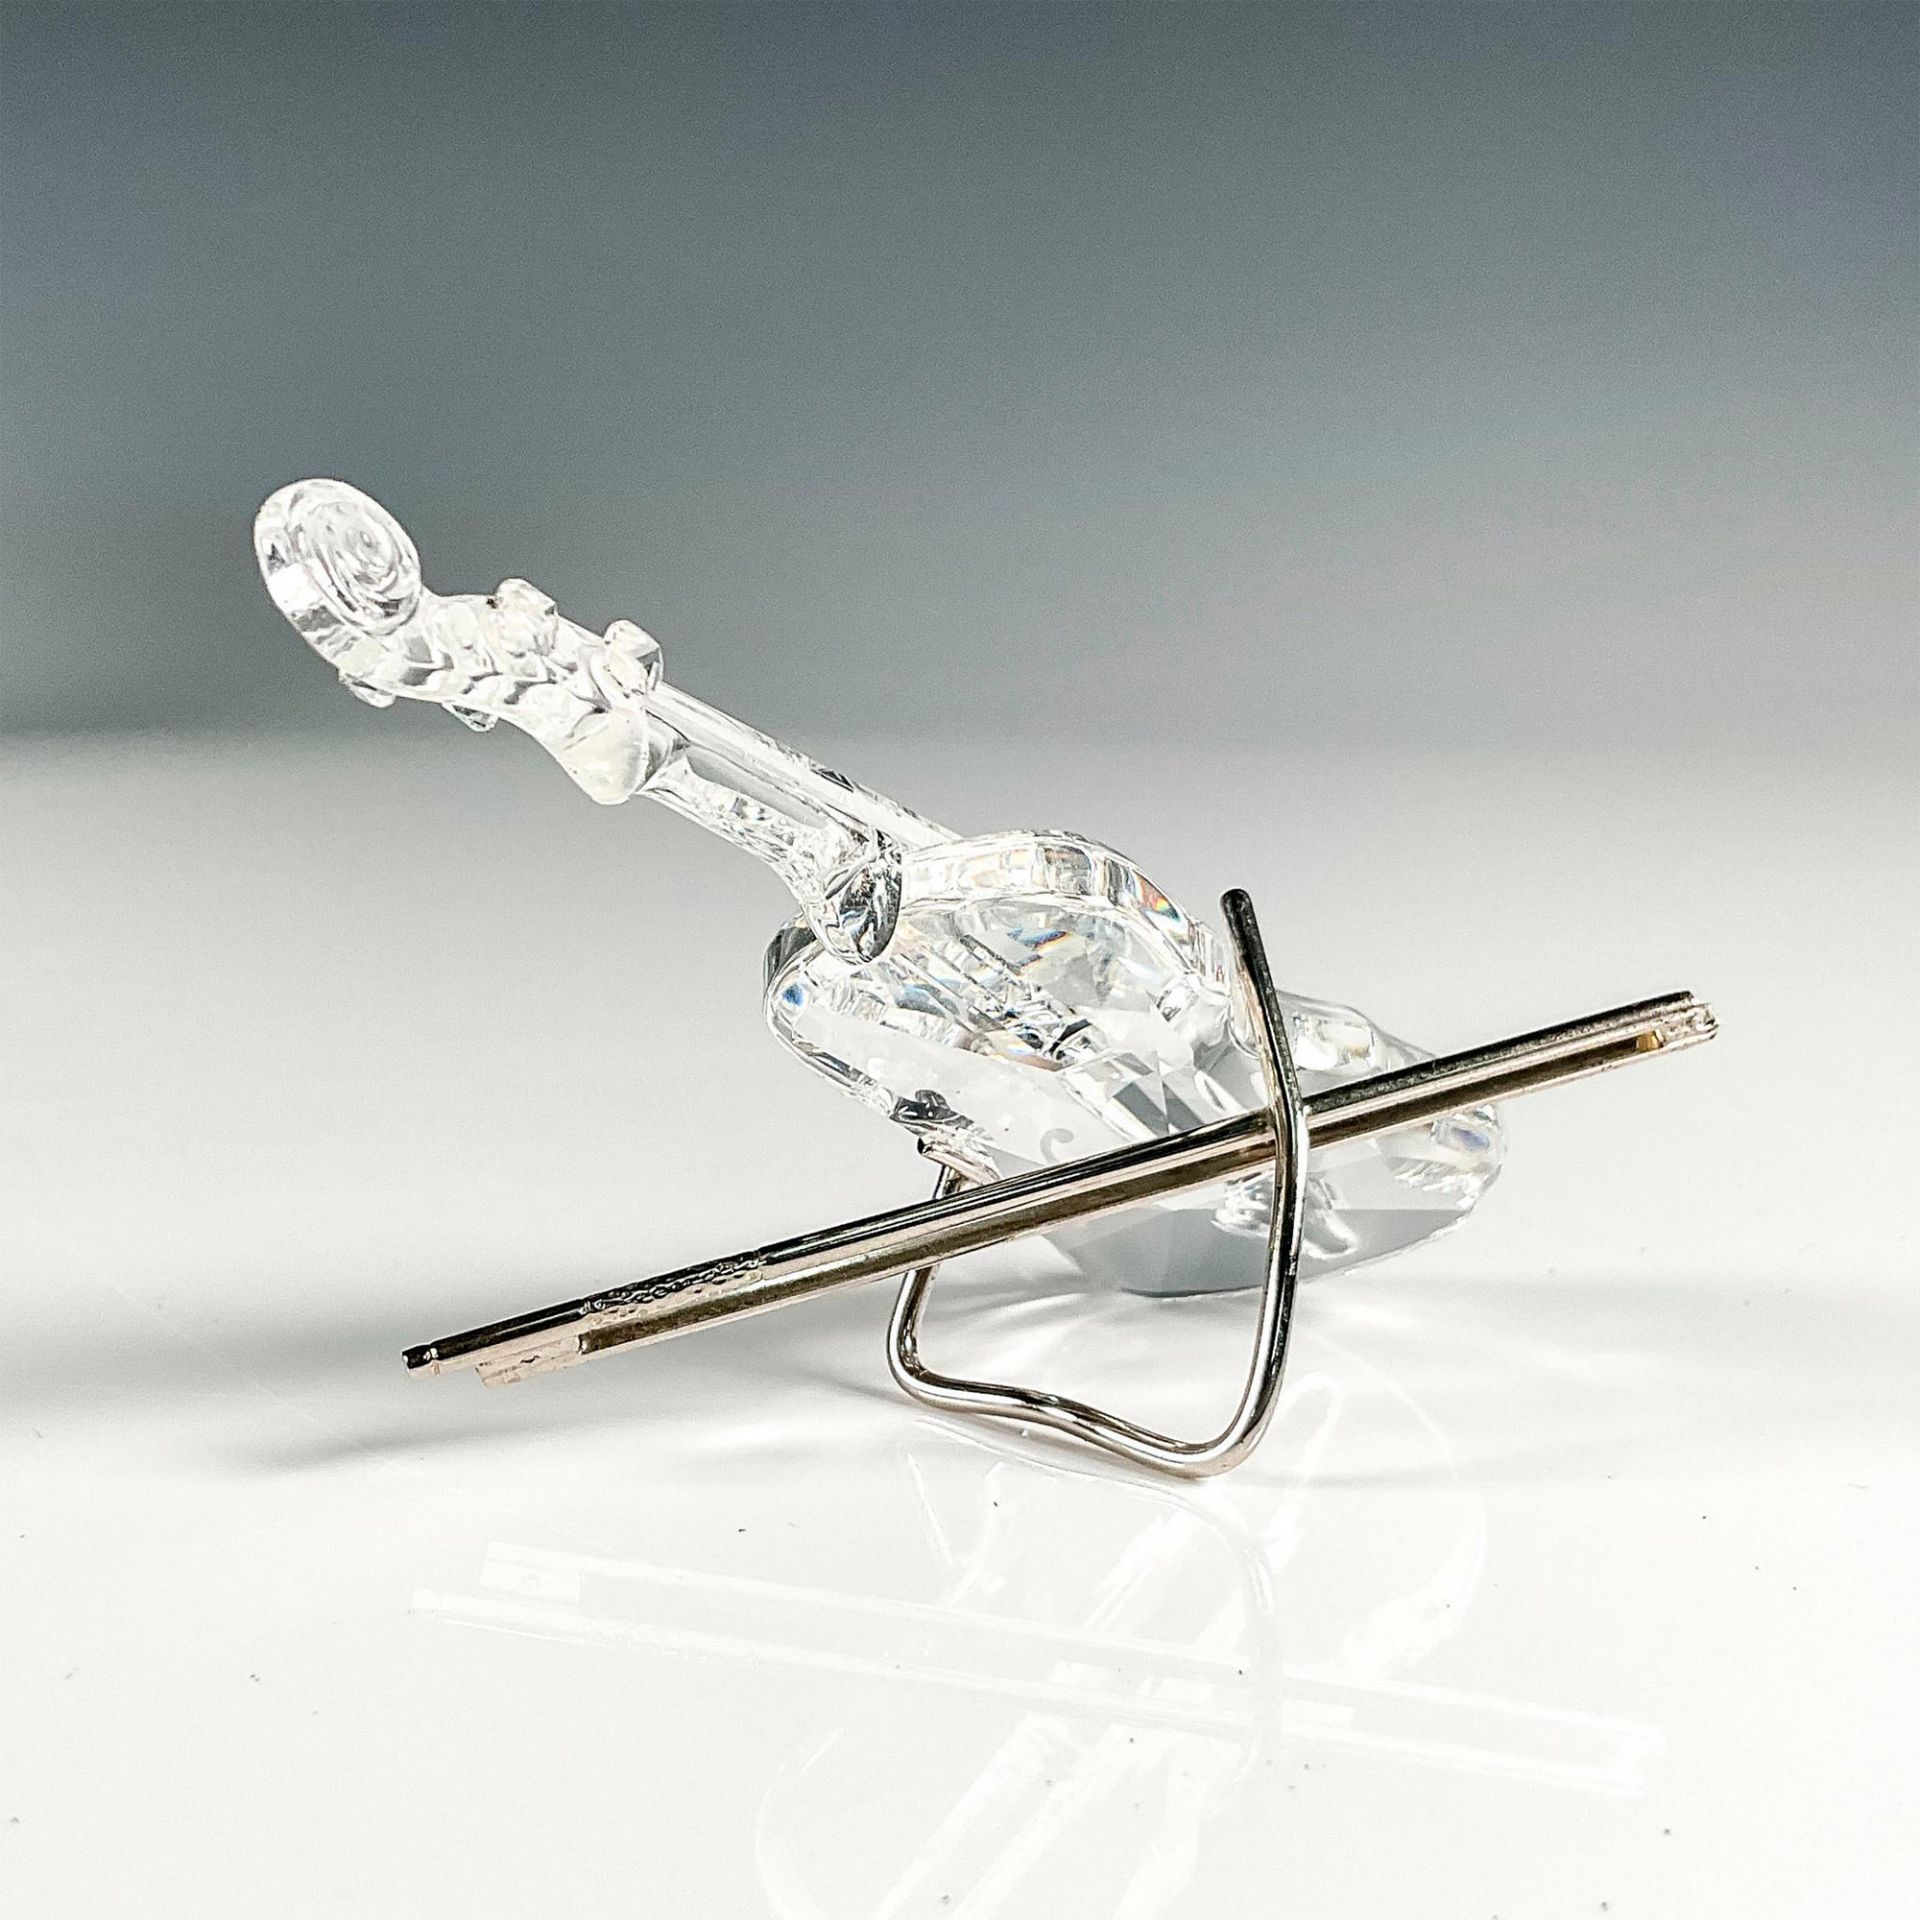 2pc Swarovski Crystal Figurine, Violin with Bow and Stand - Image 2 of 4